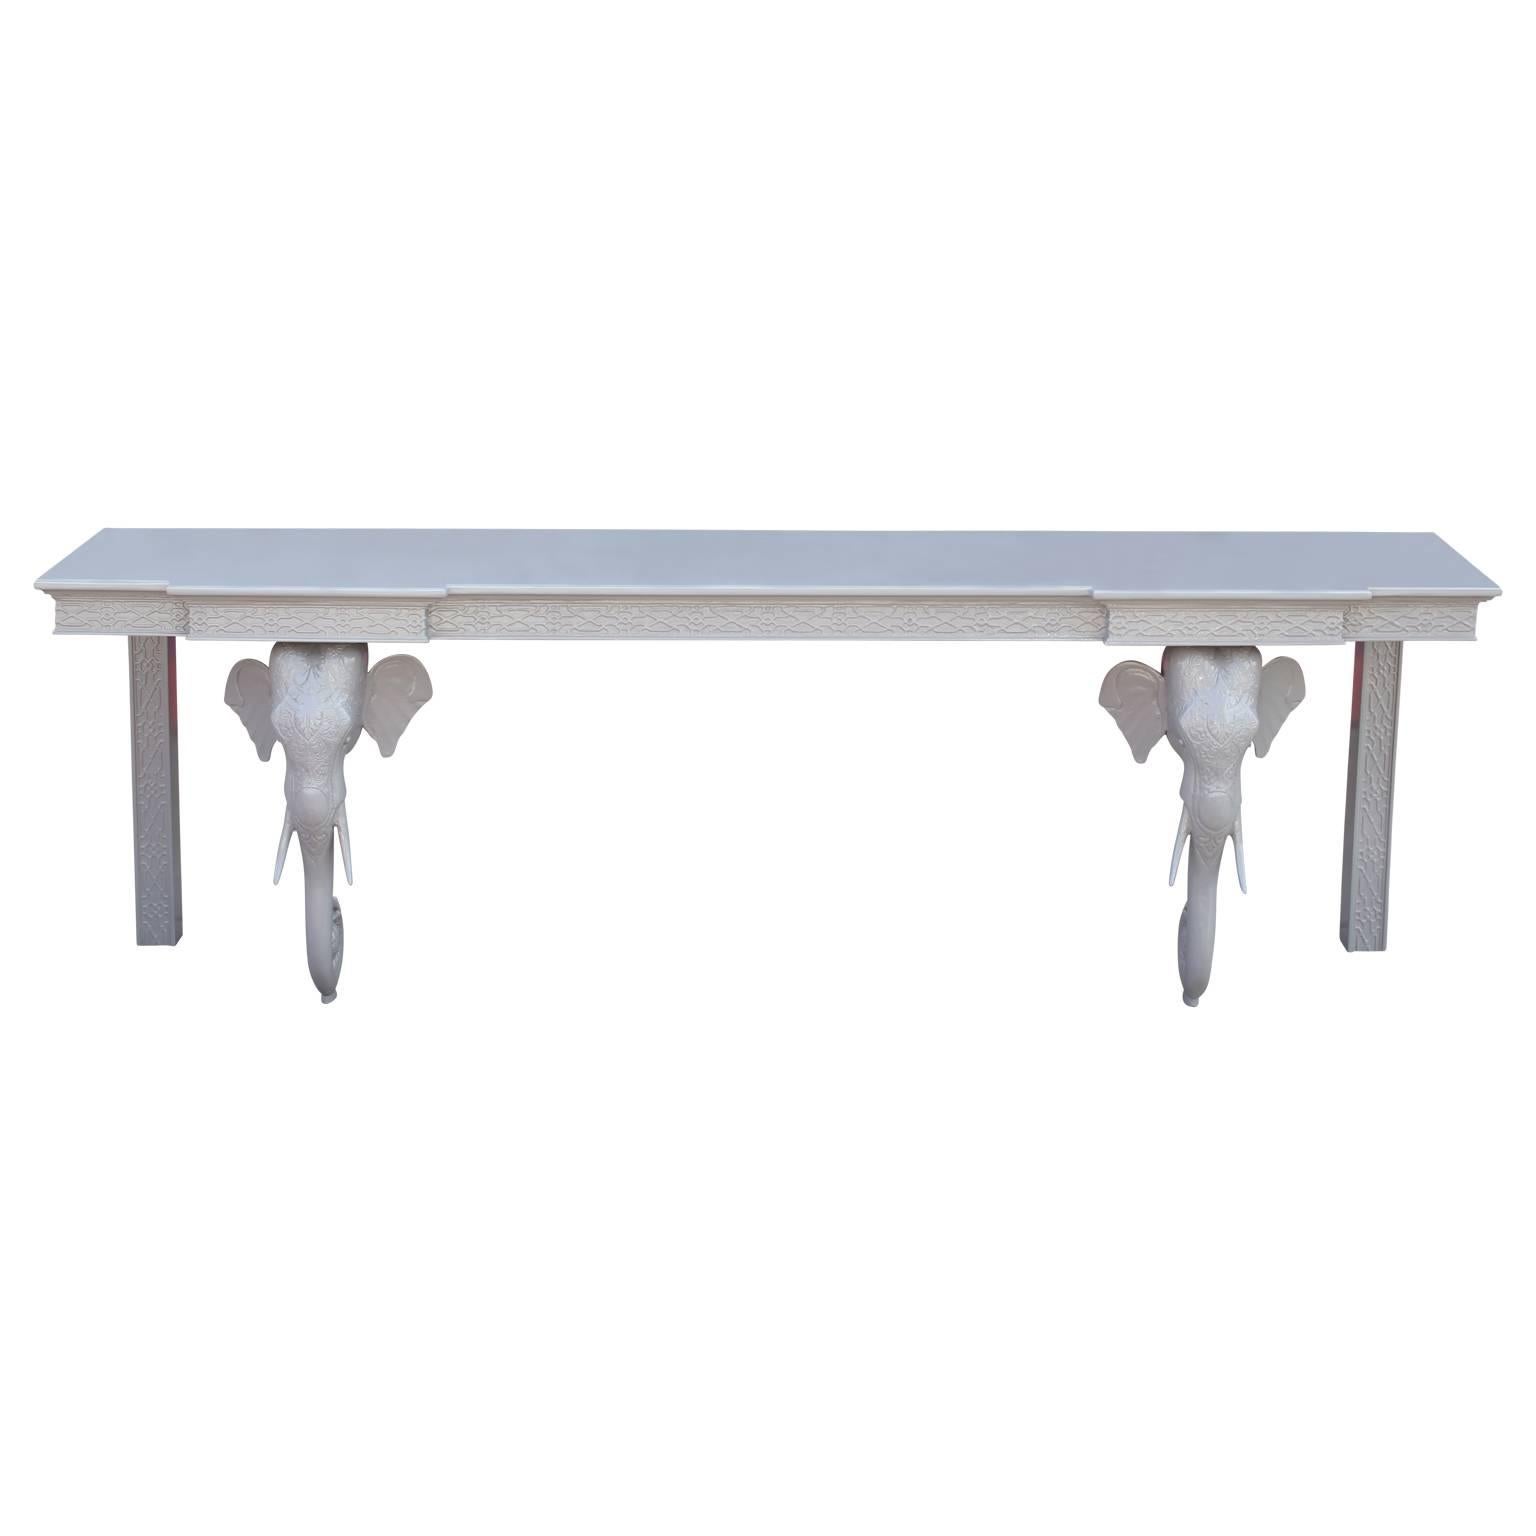 Wonderful elephant console table in the style of Gampel-Stoll with beautiful carved detailing that we had freshly lacquered in a light grey. Unique statement piece for any room!